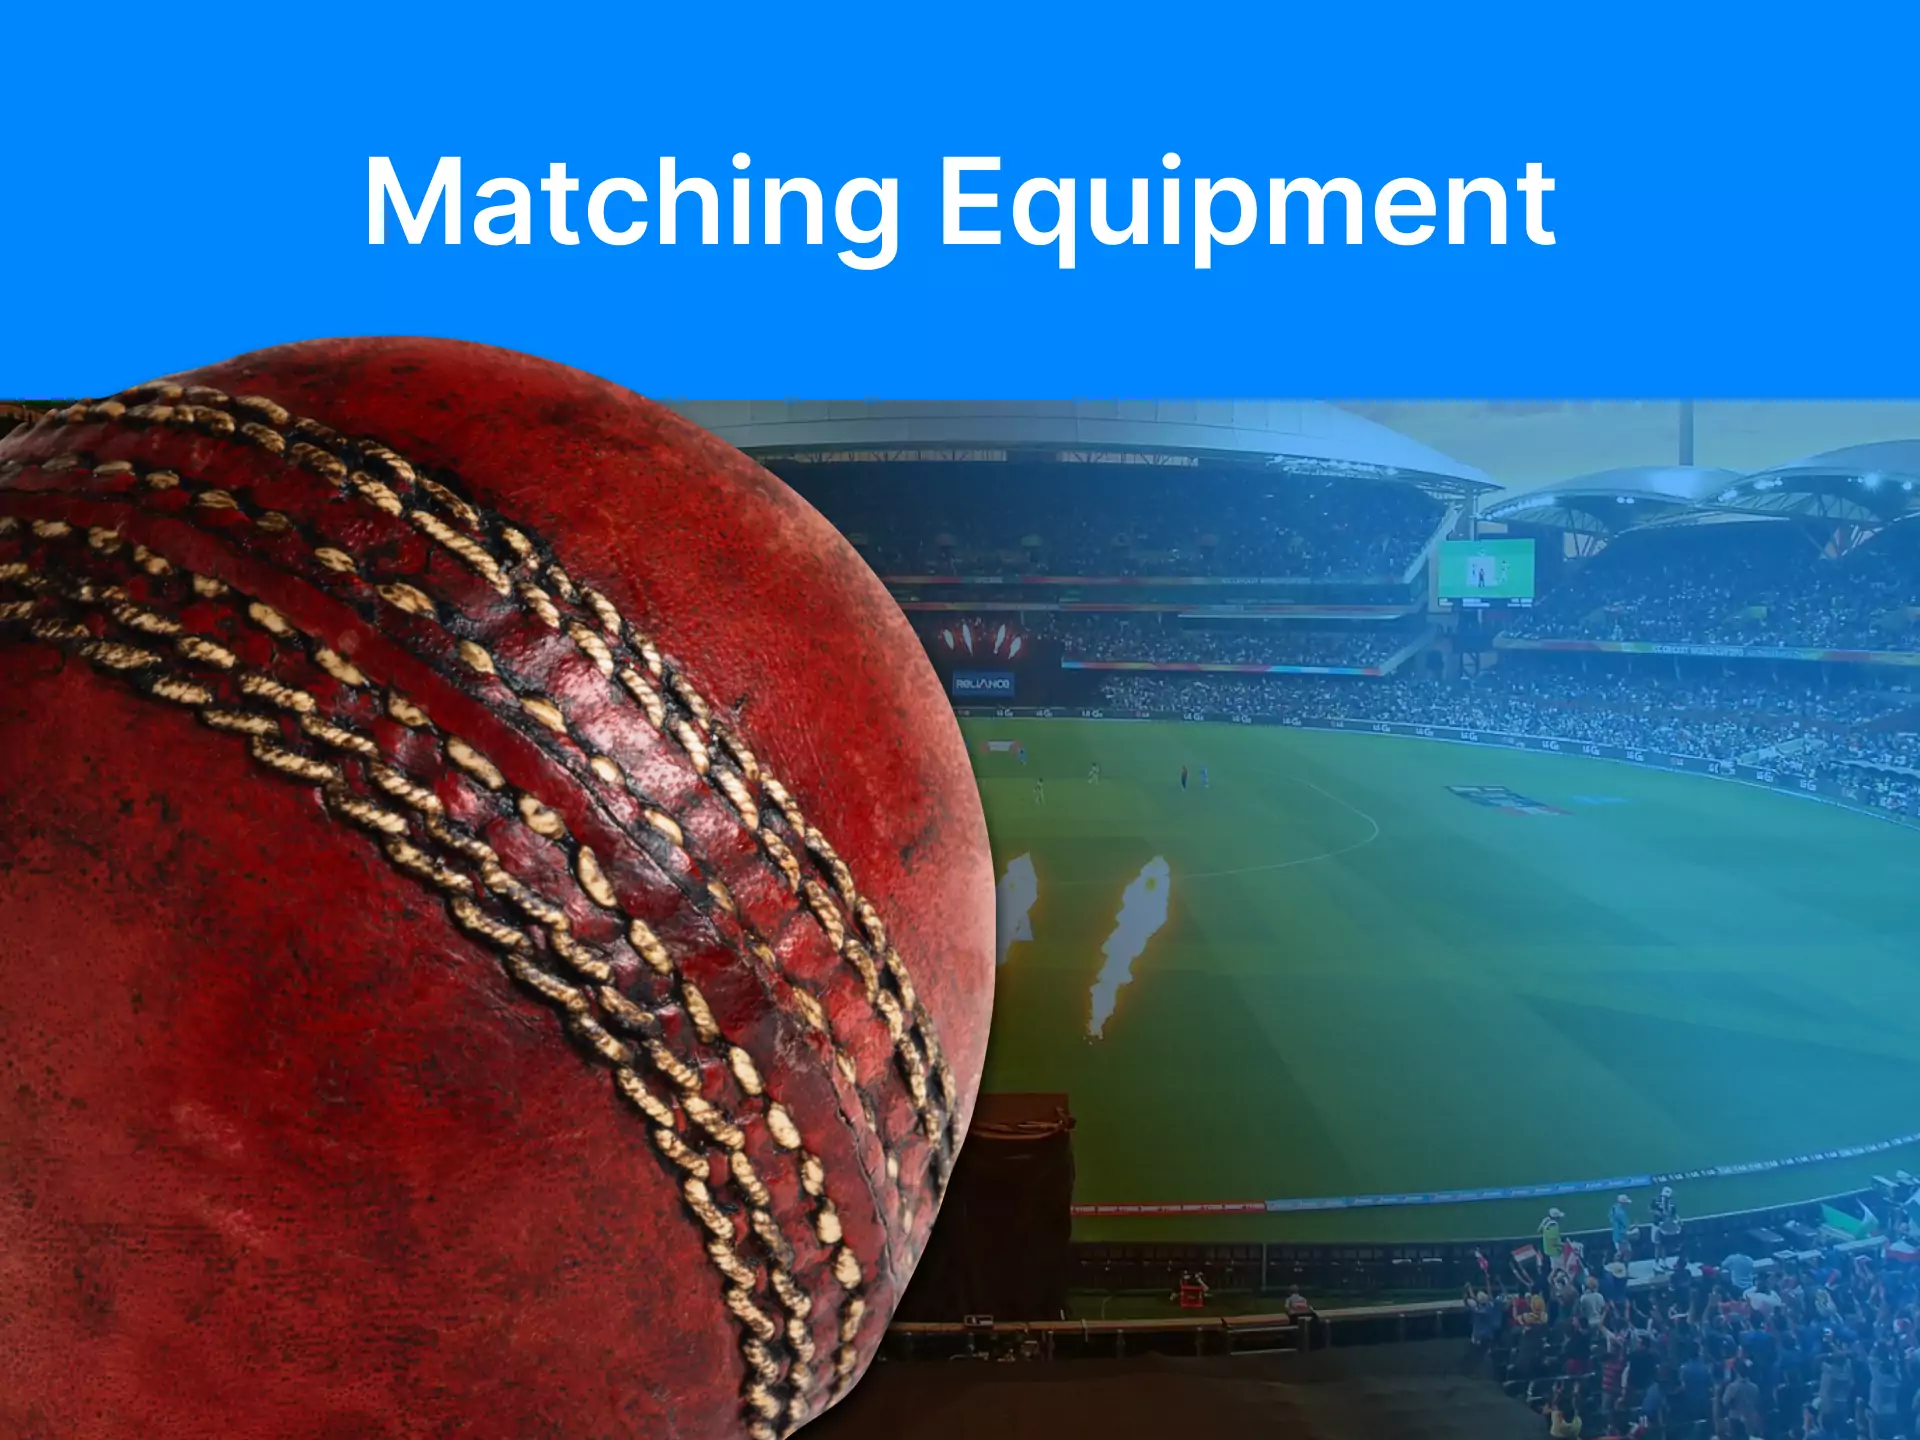 Find out what equipment is always worn during cricket matches.